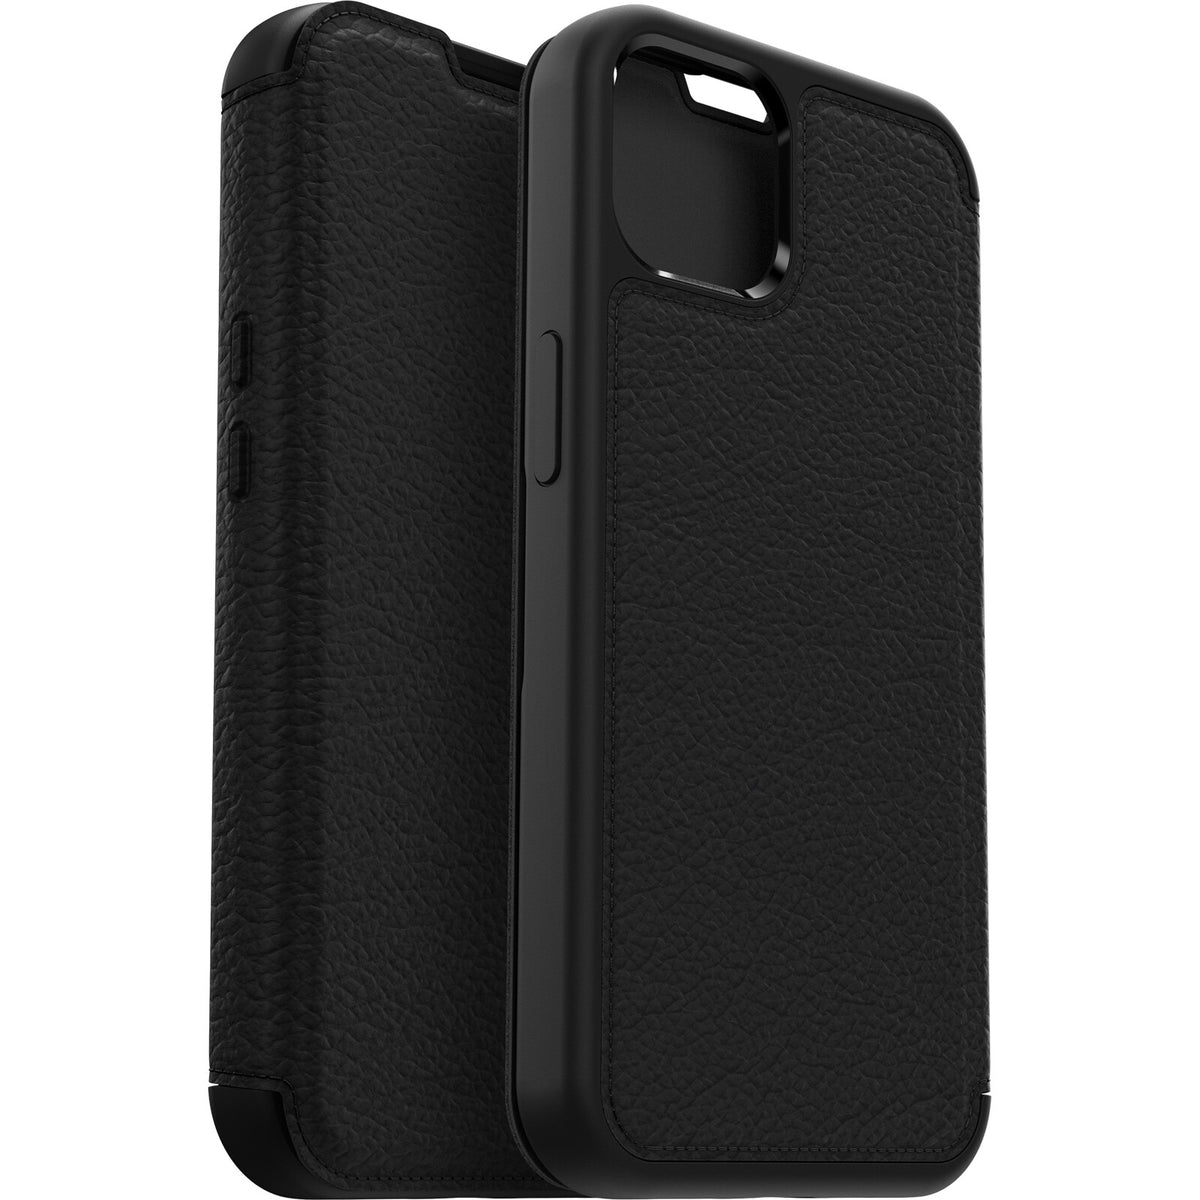 OtterBox Strada Folio Series for iPhone 13 in Black - No Packaging